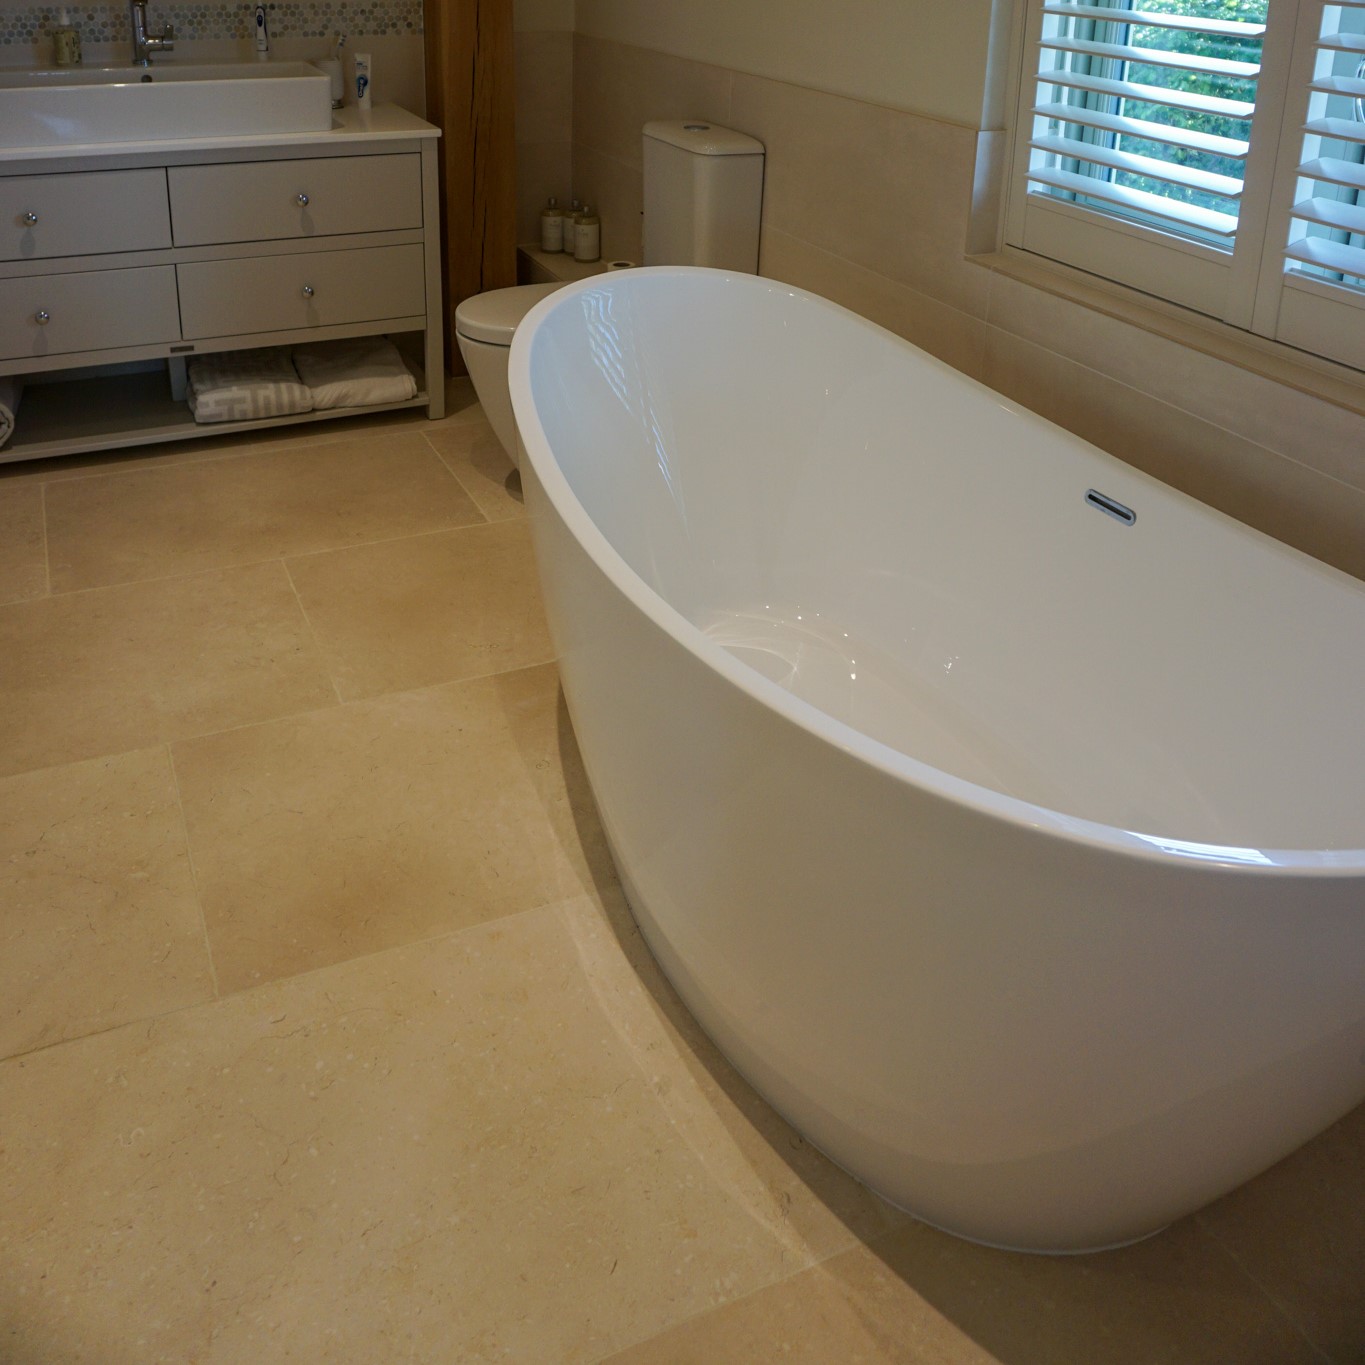 Reasons to consider stone tiles for your bathroom renovation